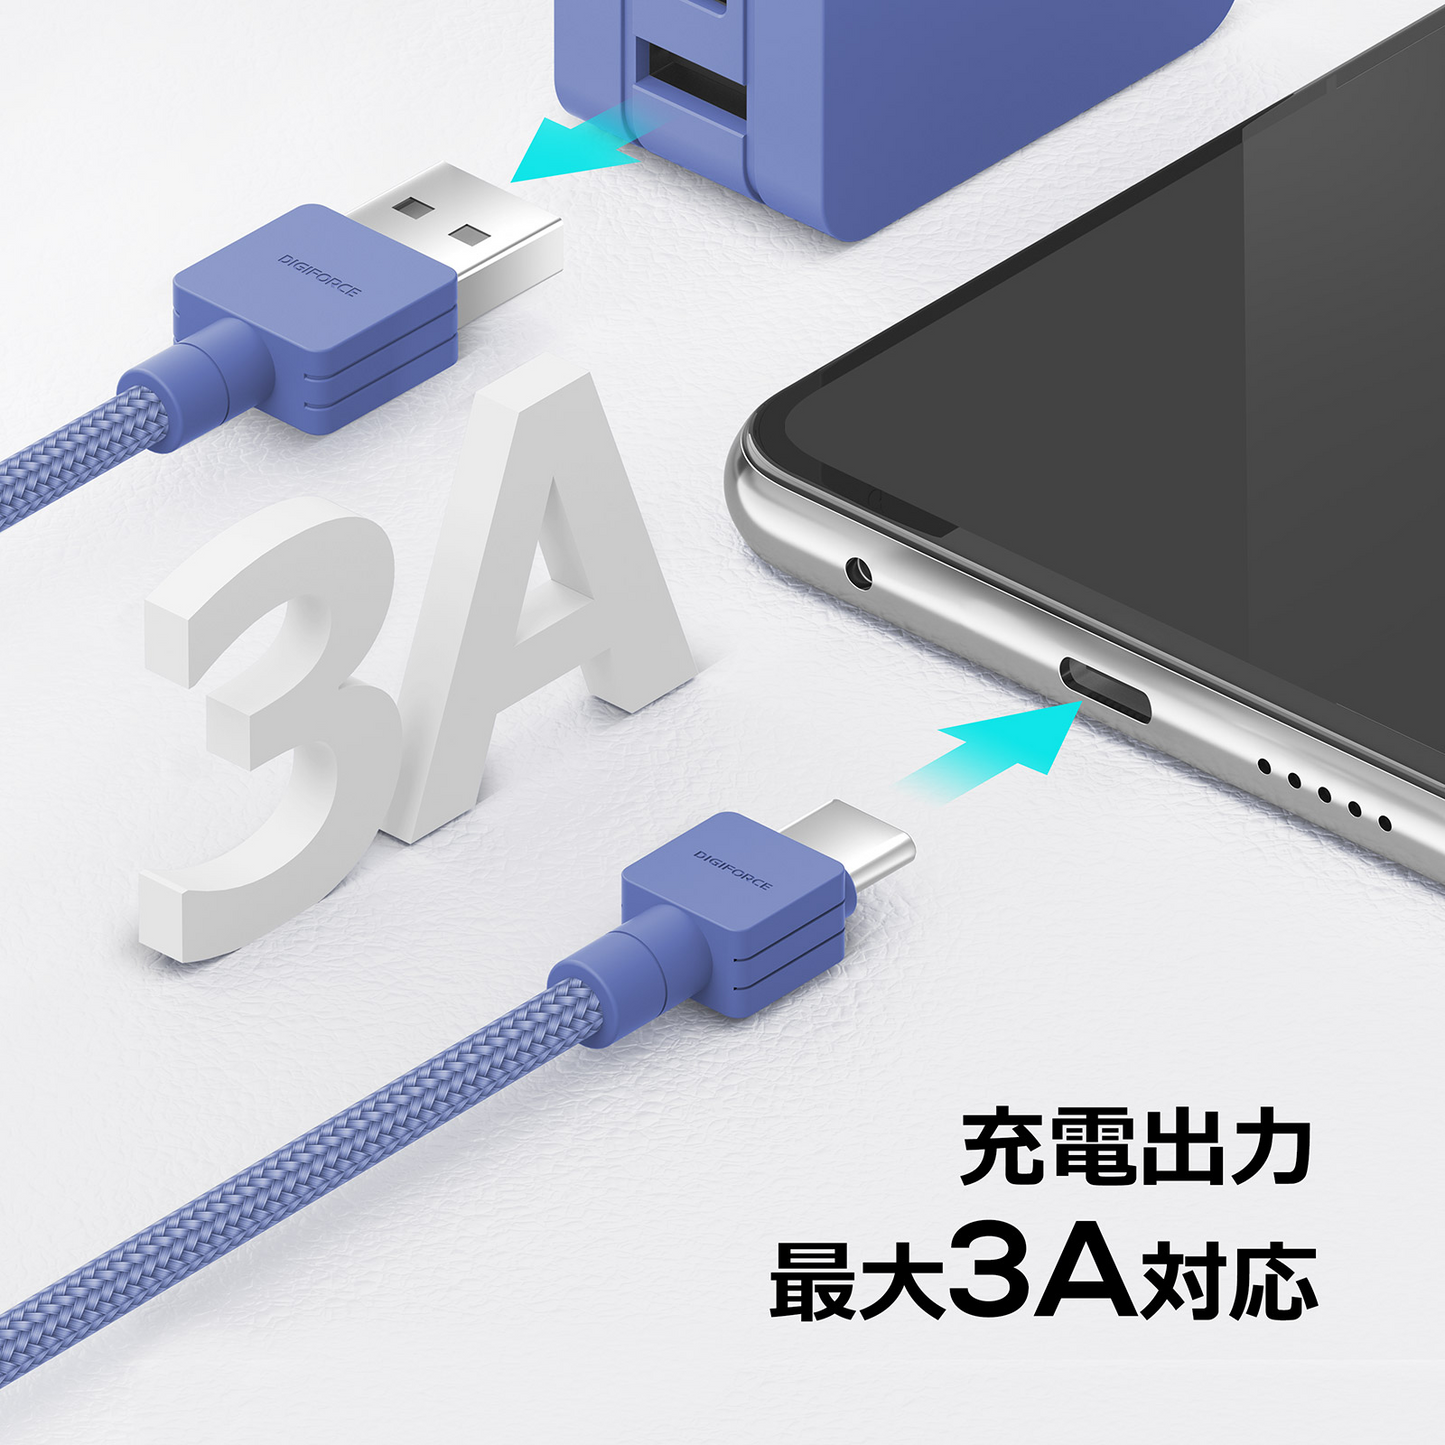 【Type-A to C Cable 2m】USB-A スマートフォン タブレット端末 ゲームコントローラー D0085